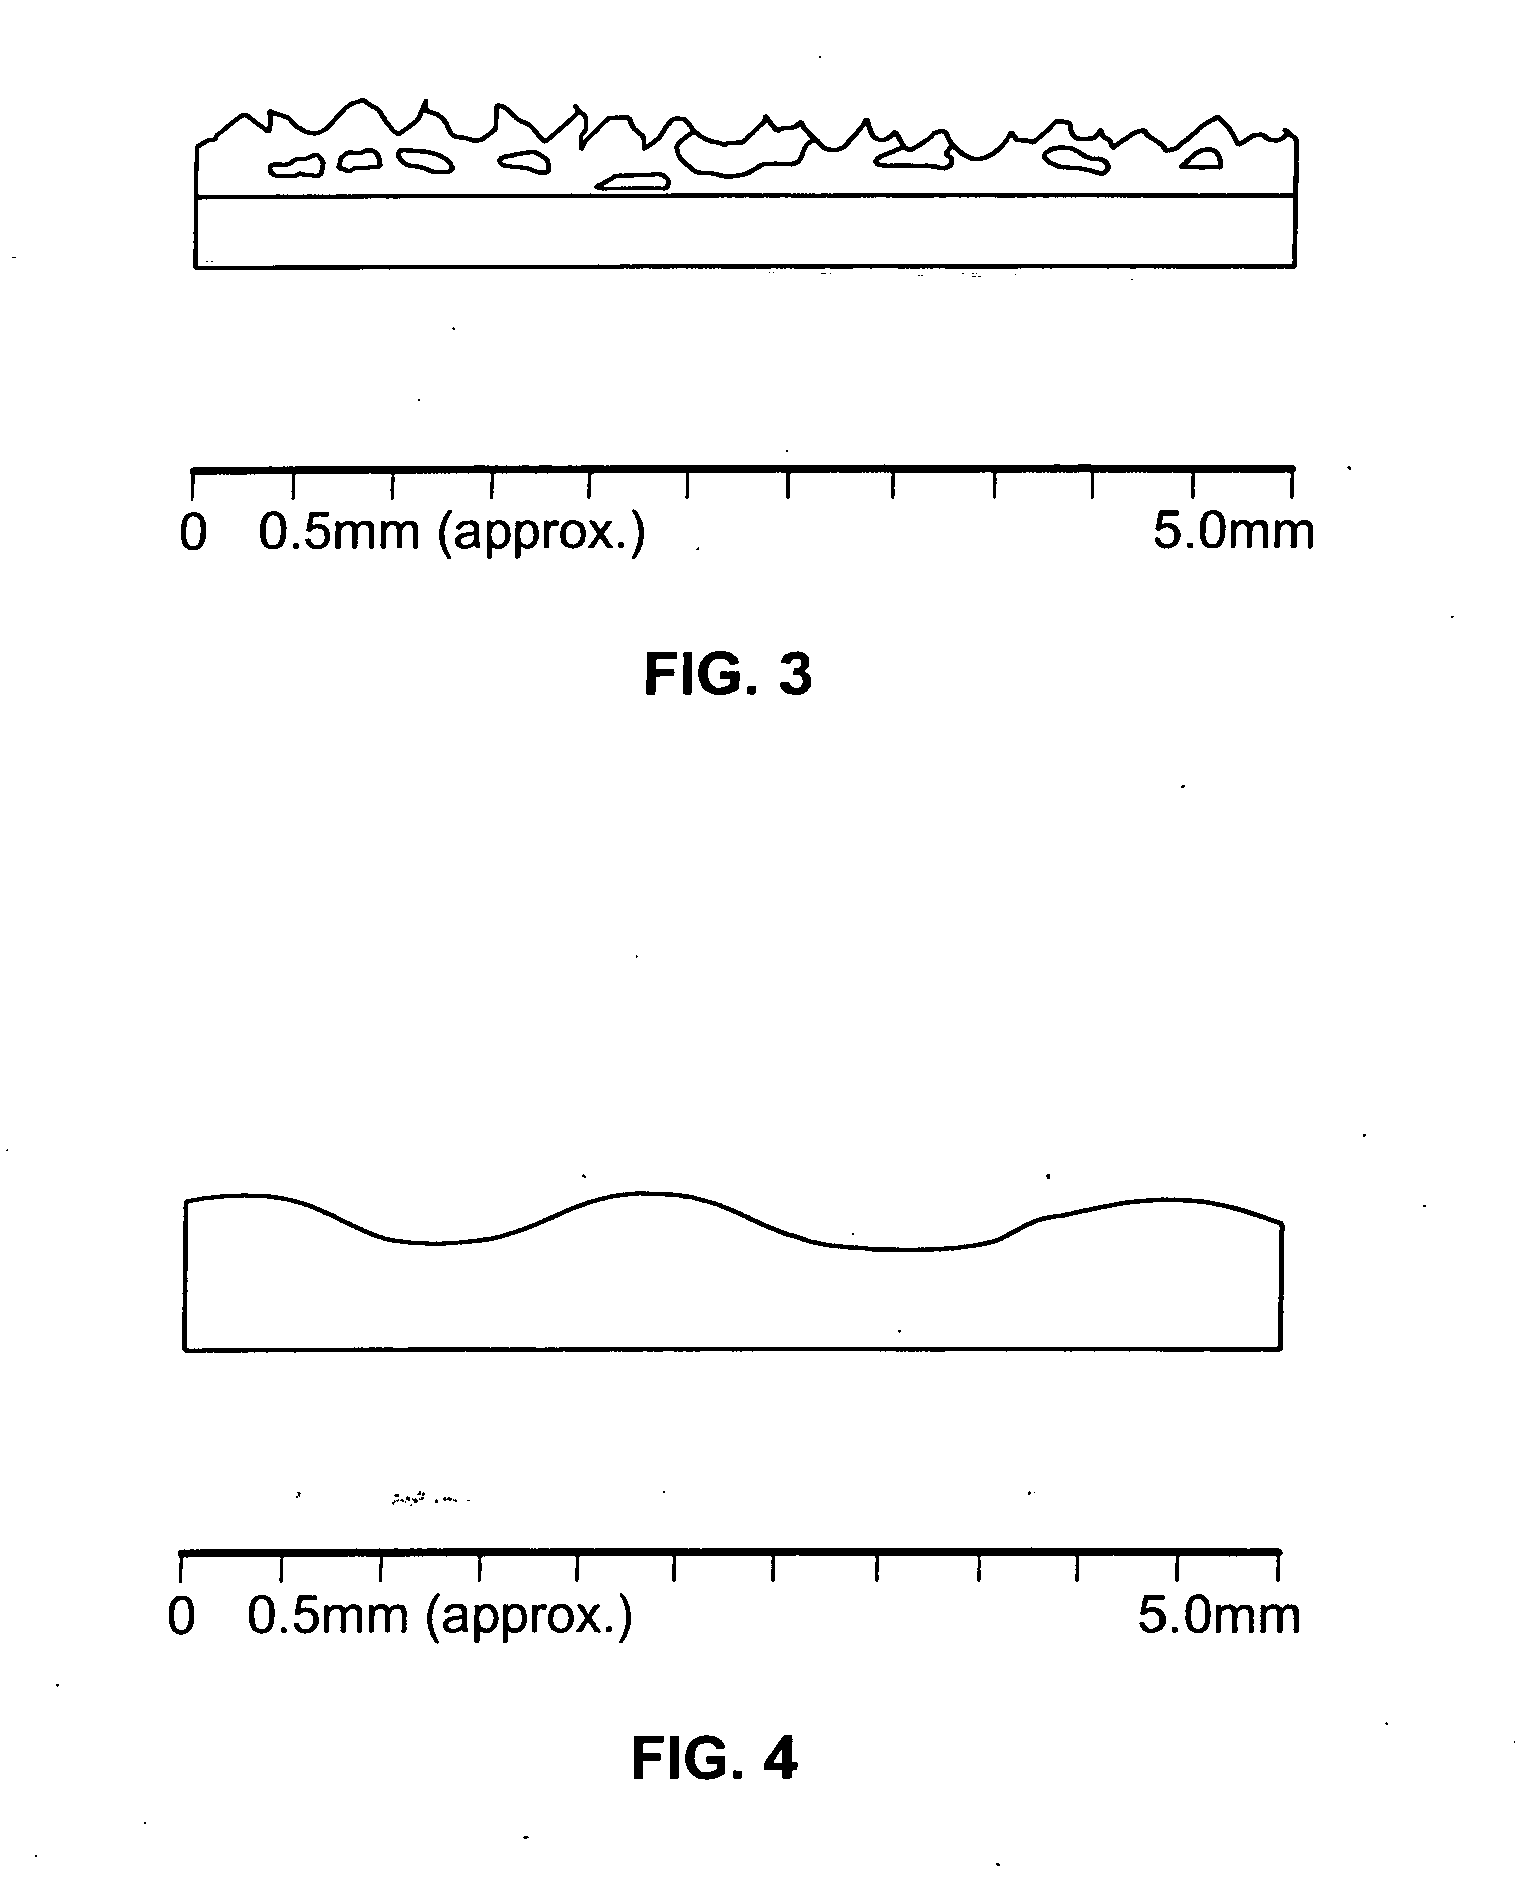 Textured surface coating for gloves and method of making